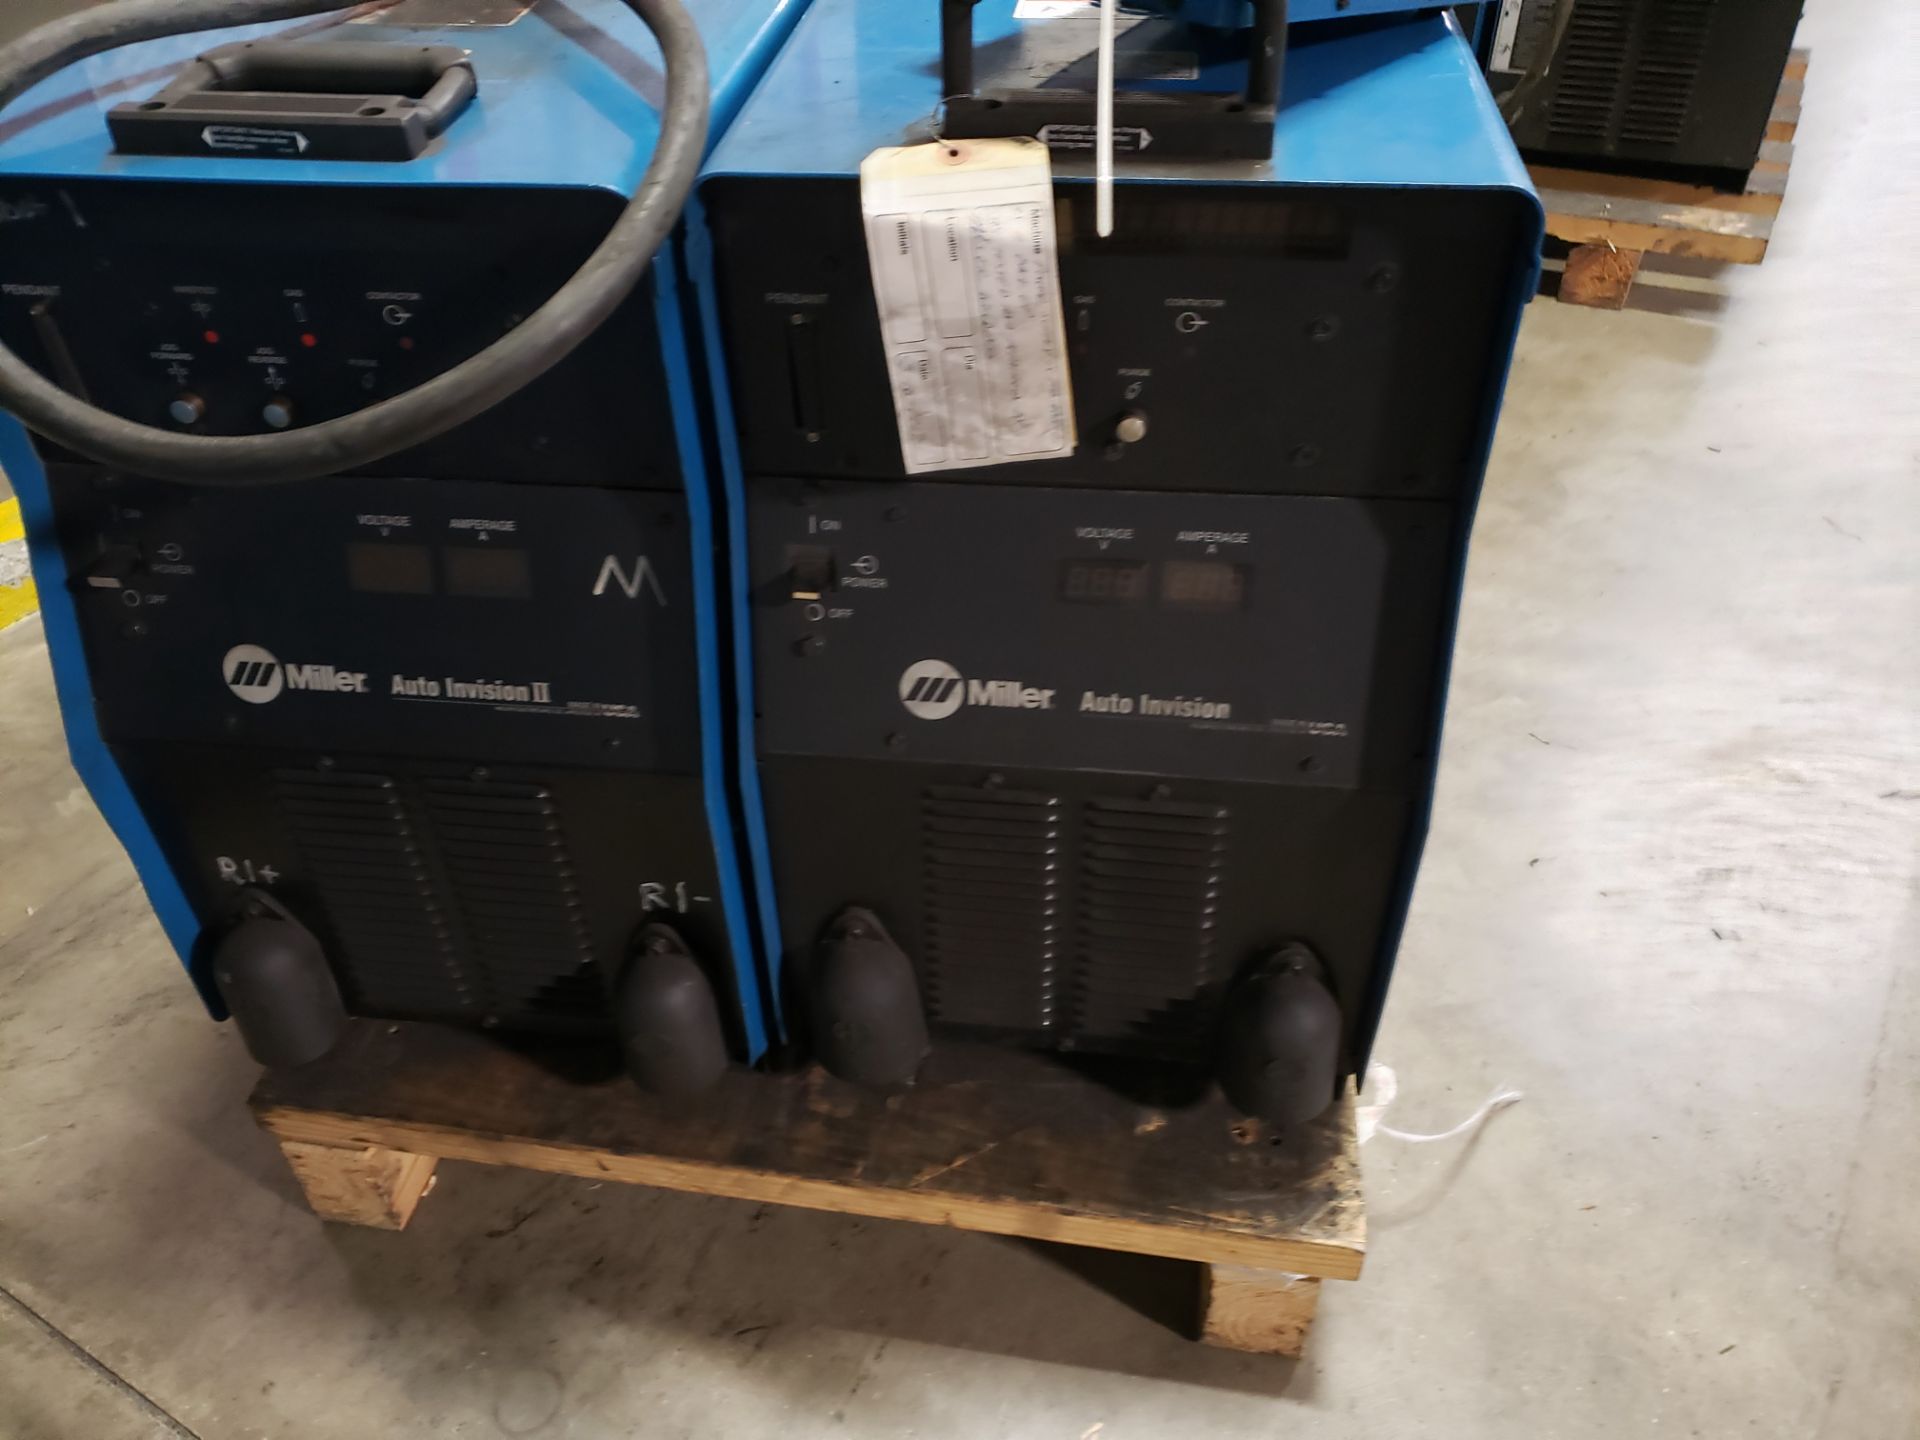 1 LOT CONSISTING OF MILLER AUTOINVISION II & AUTOINVISION WELDING SUPPLY UNITS AND MORE - Image 9 of 10